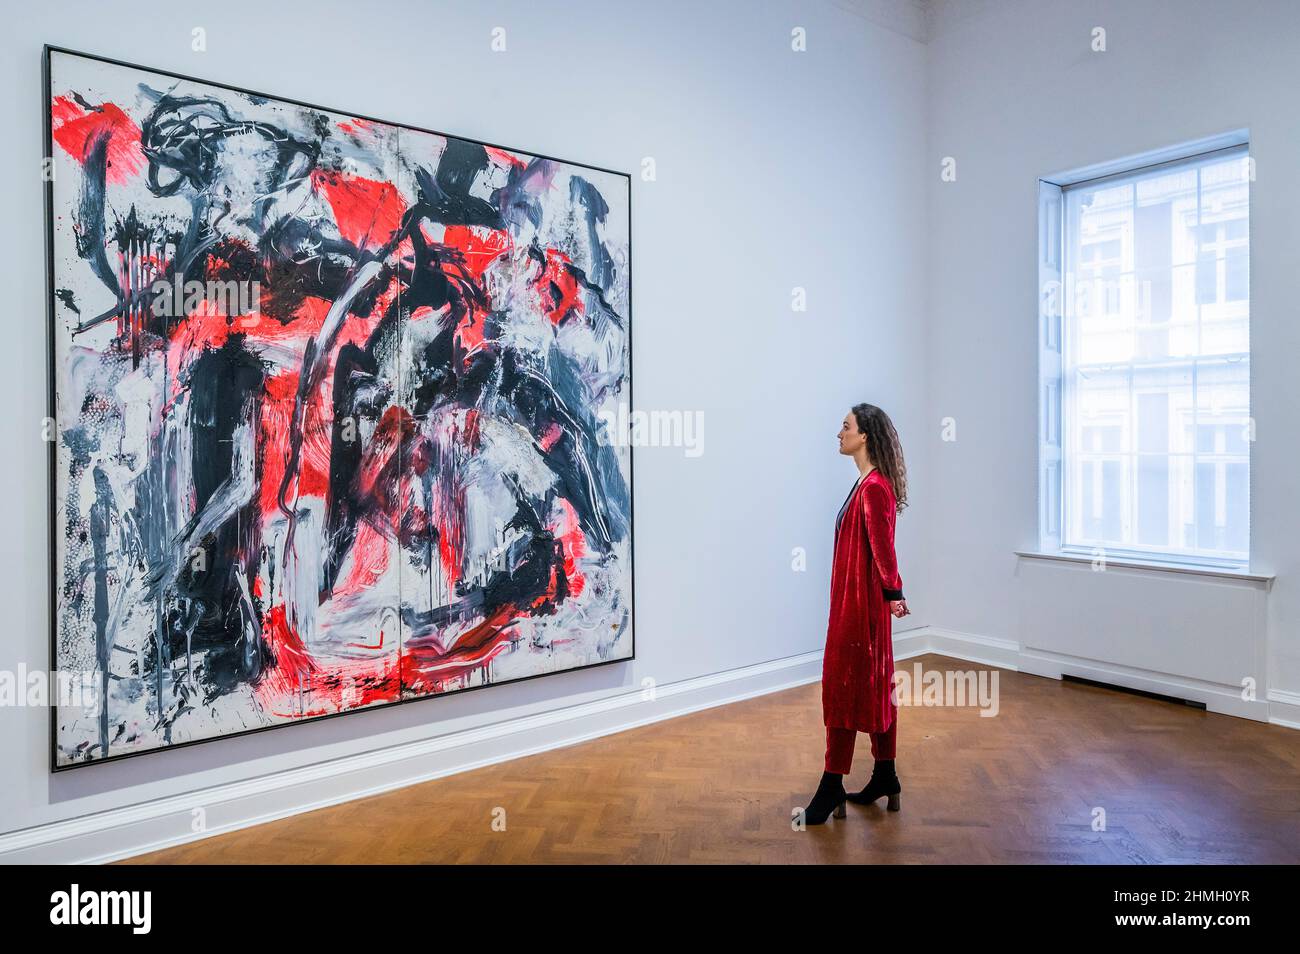 London, UK. 10th Feb, 2022. Senza Totolo -rosso '85, 1985 - Emilio Vedova, documenta 7, at Galerie Thaddaeus Ropac, London. Reunited for the first time: five major paintings from documenta in 1982, on view with important works from the same decade. The First solo show in the UK for a revolutionary of his time: a striking and radical artist, who navigated between tradition and the avant-garde. Credit: Guy Bell/Alamy Live News Stock Photo